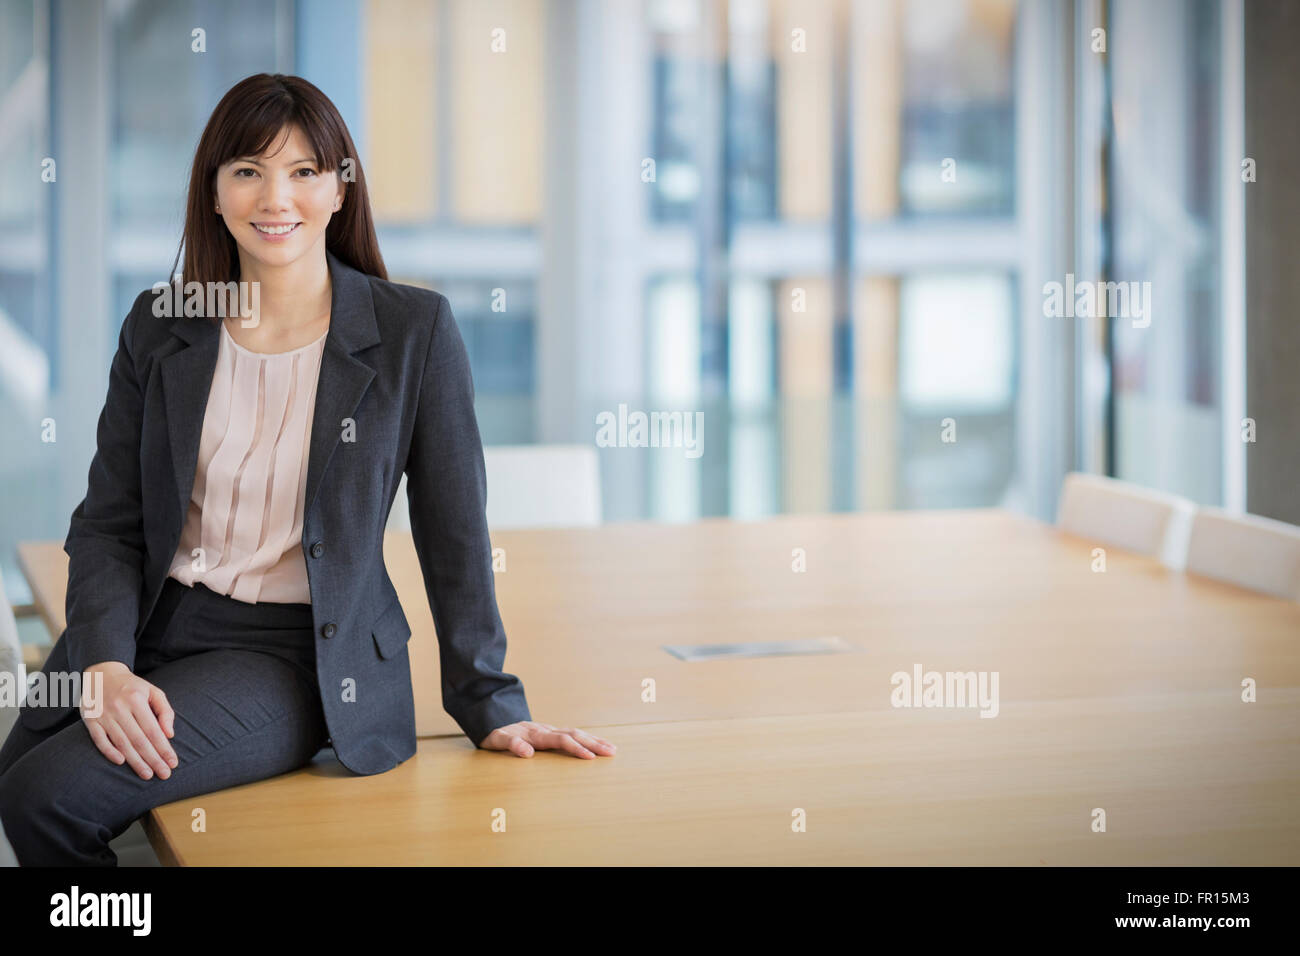 Portrait smiling businesswoman leaning on conference table Stock Photo